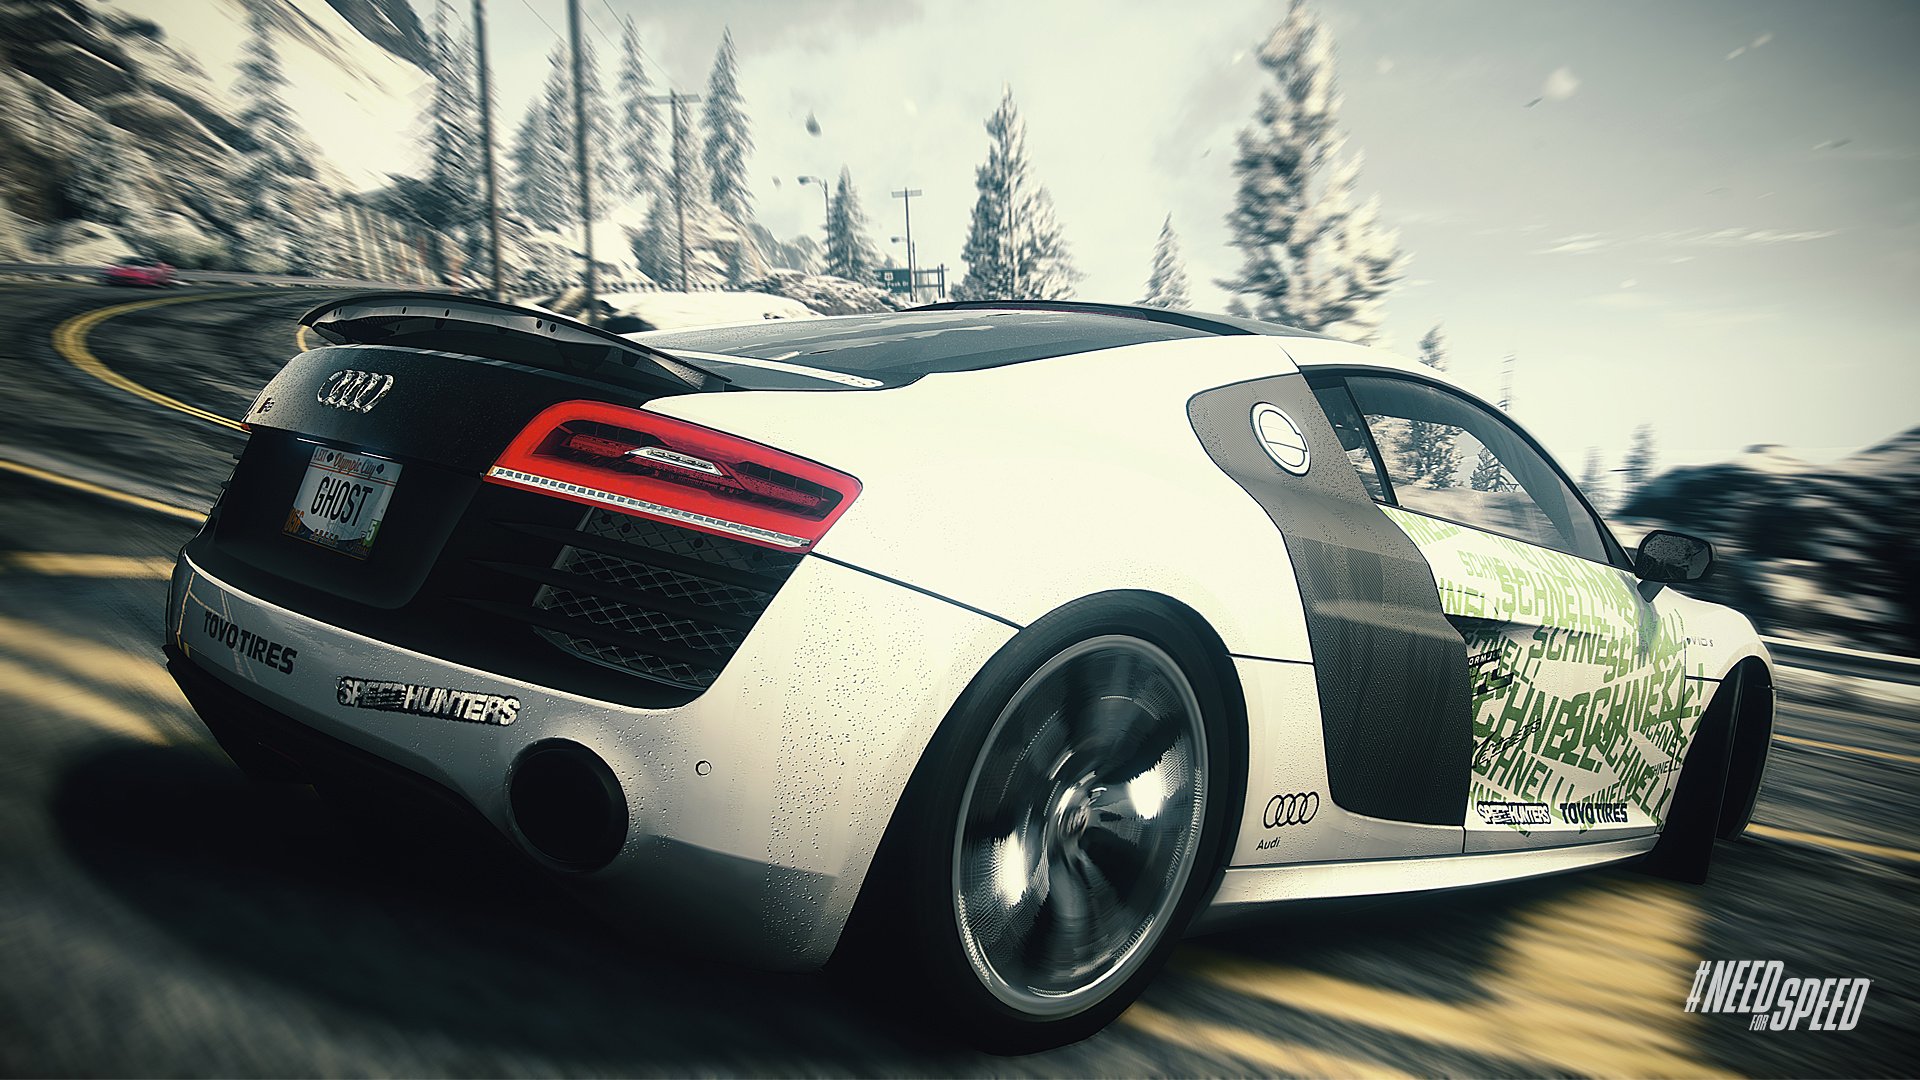 Review: Need For Speed: Rivals